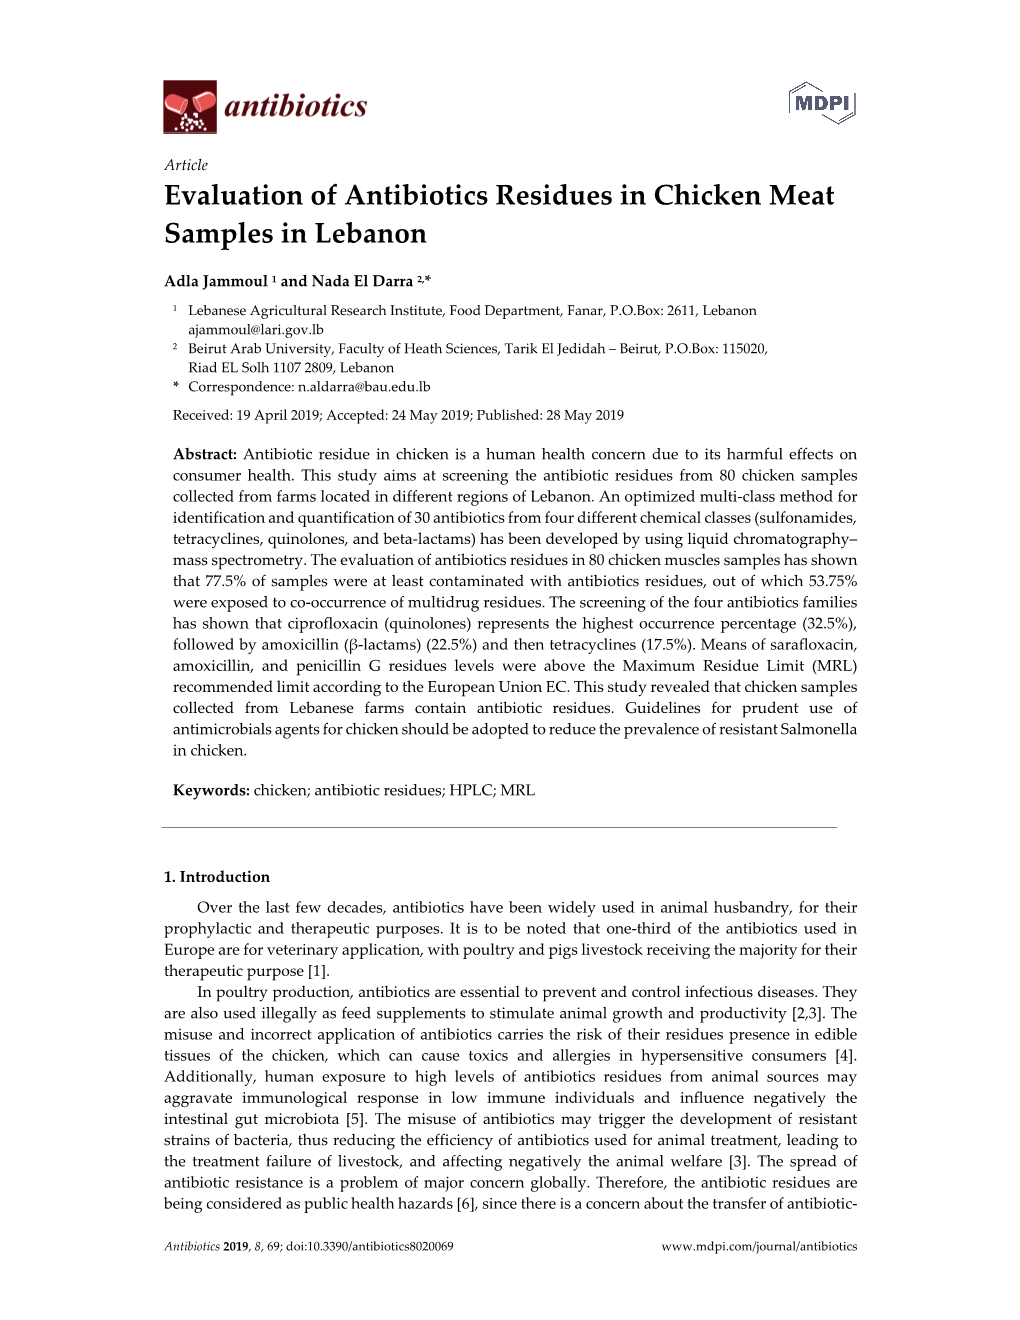 Evaluation of Antibiotics Residues in Chicken Meat Samples in Lebanon